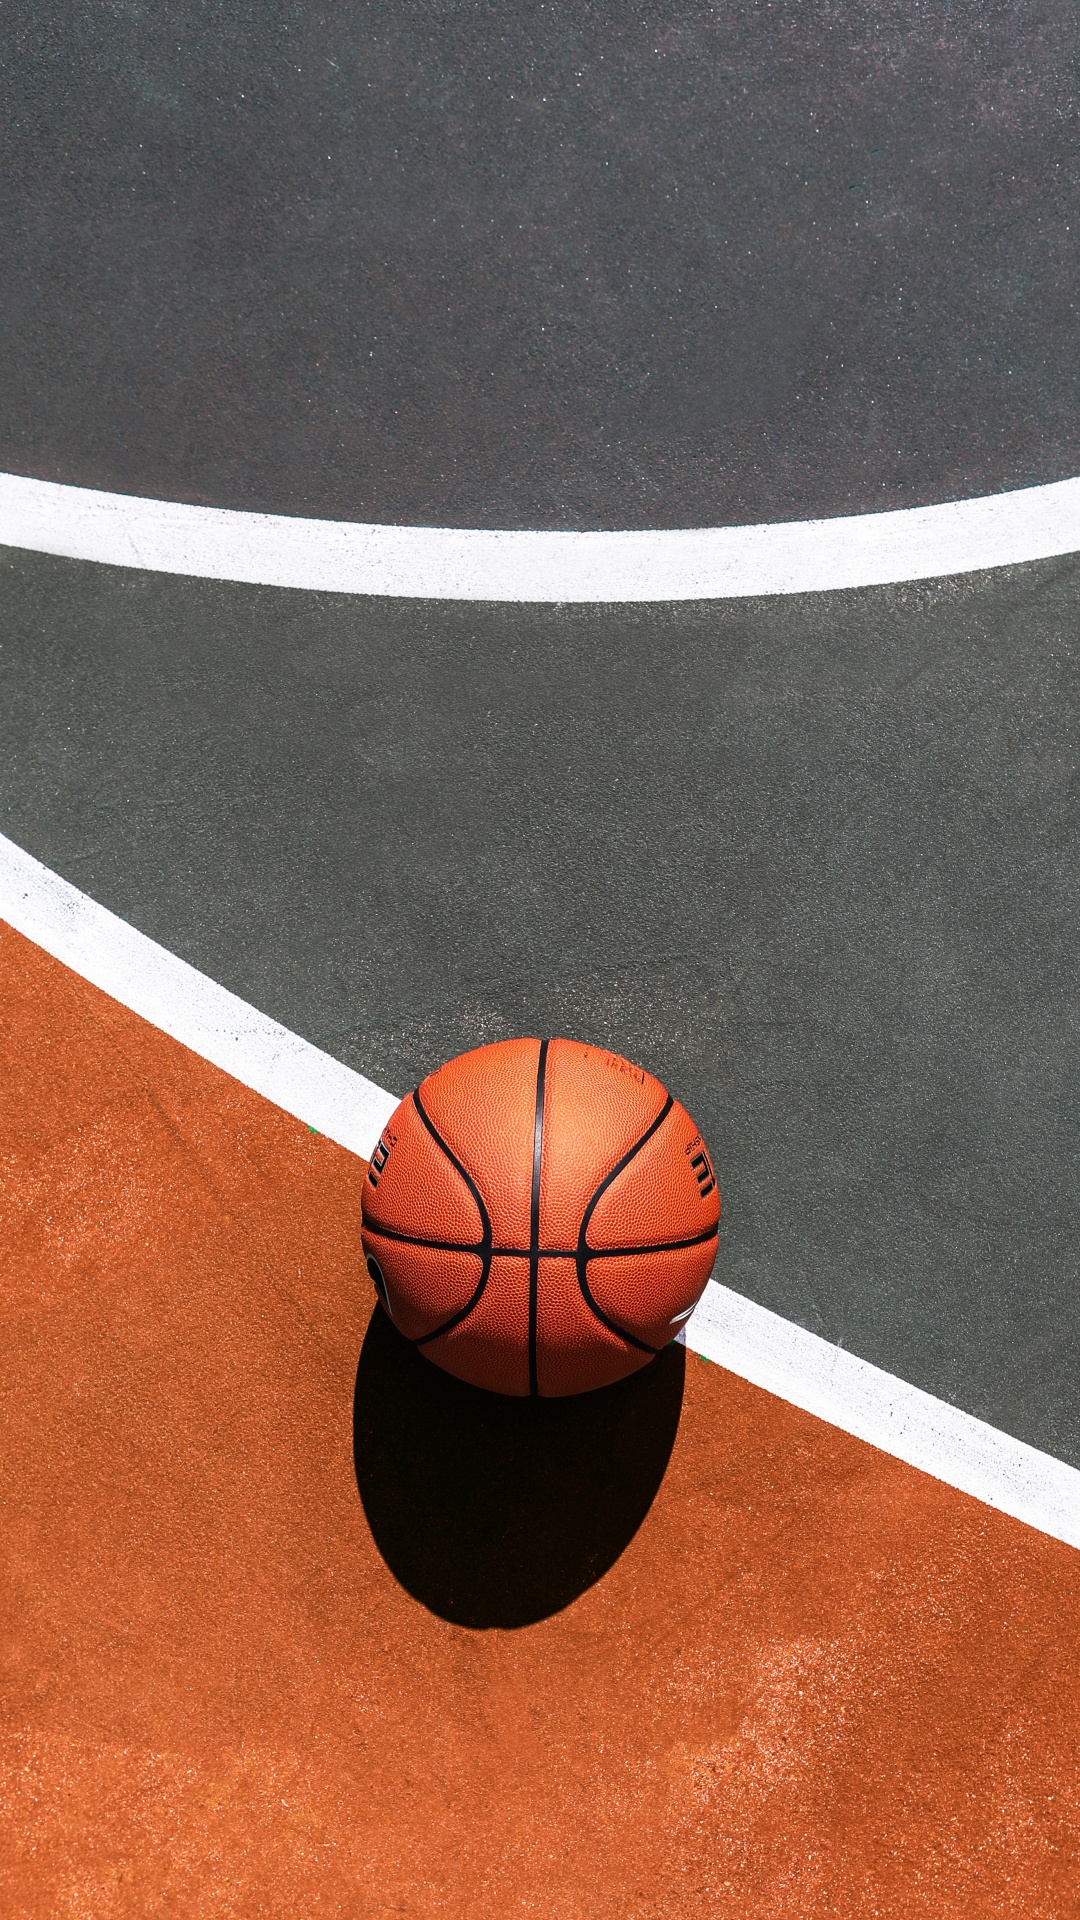 Basketball on Blue and White Basketball Court. Wallpaper in 1080x1920 Resolution